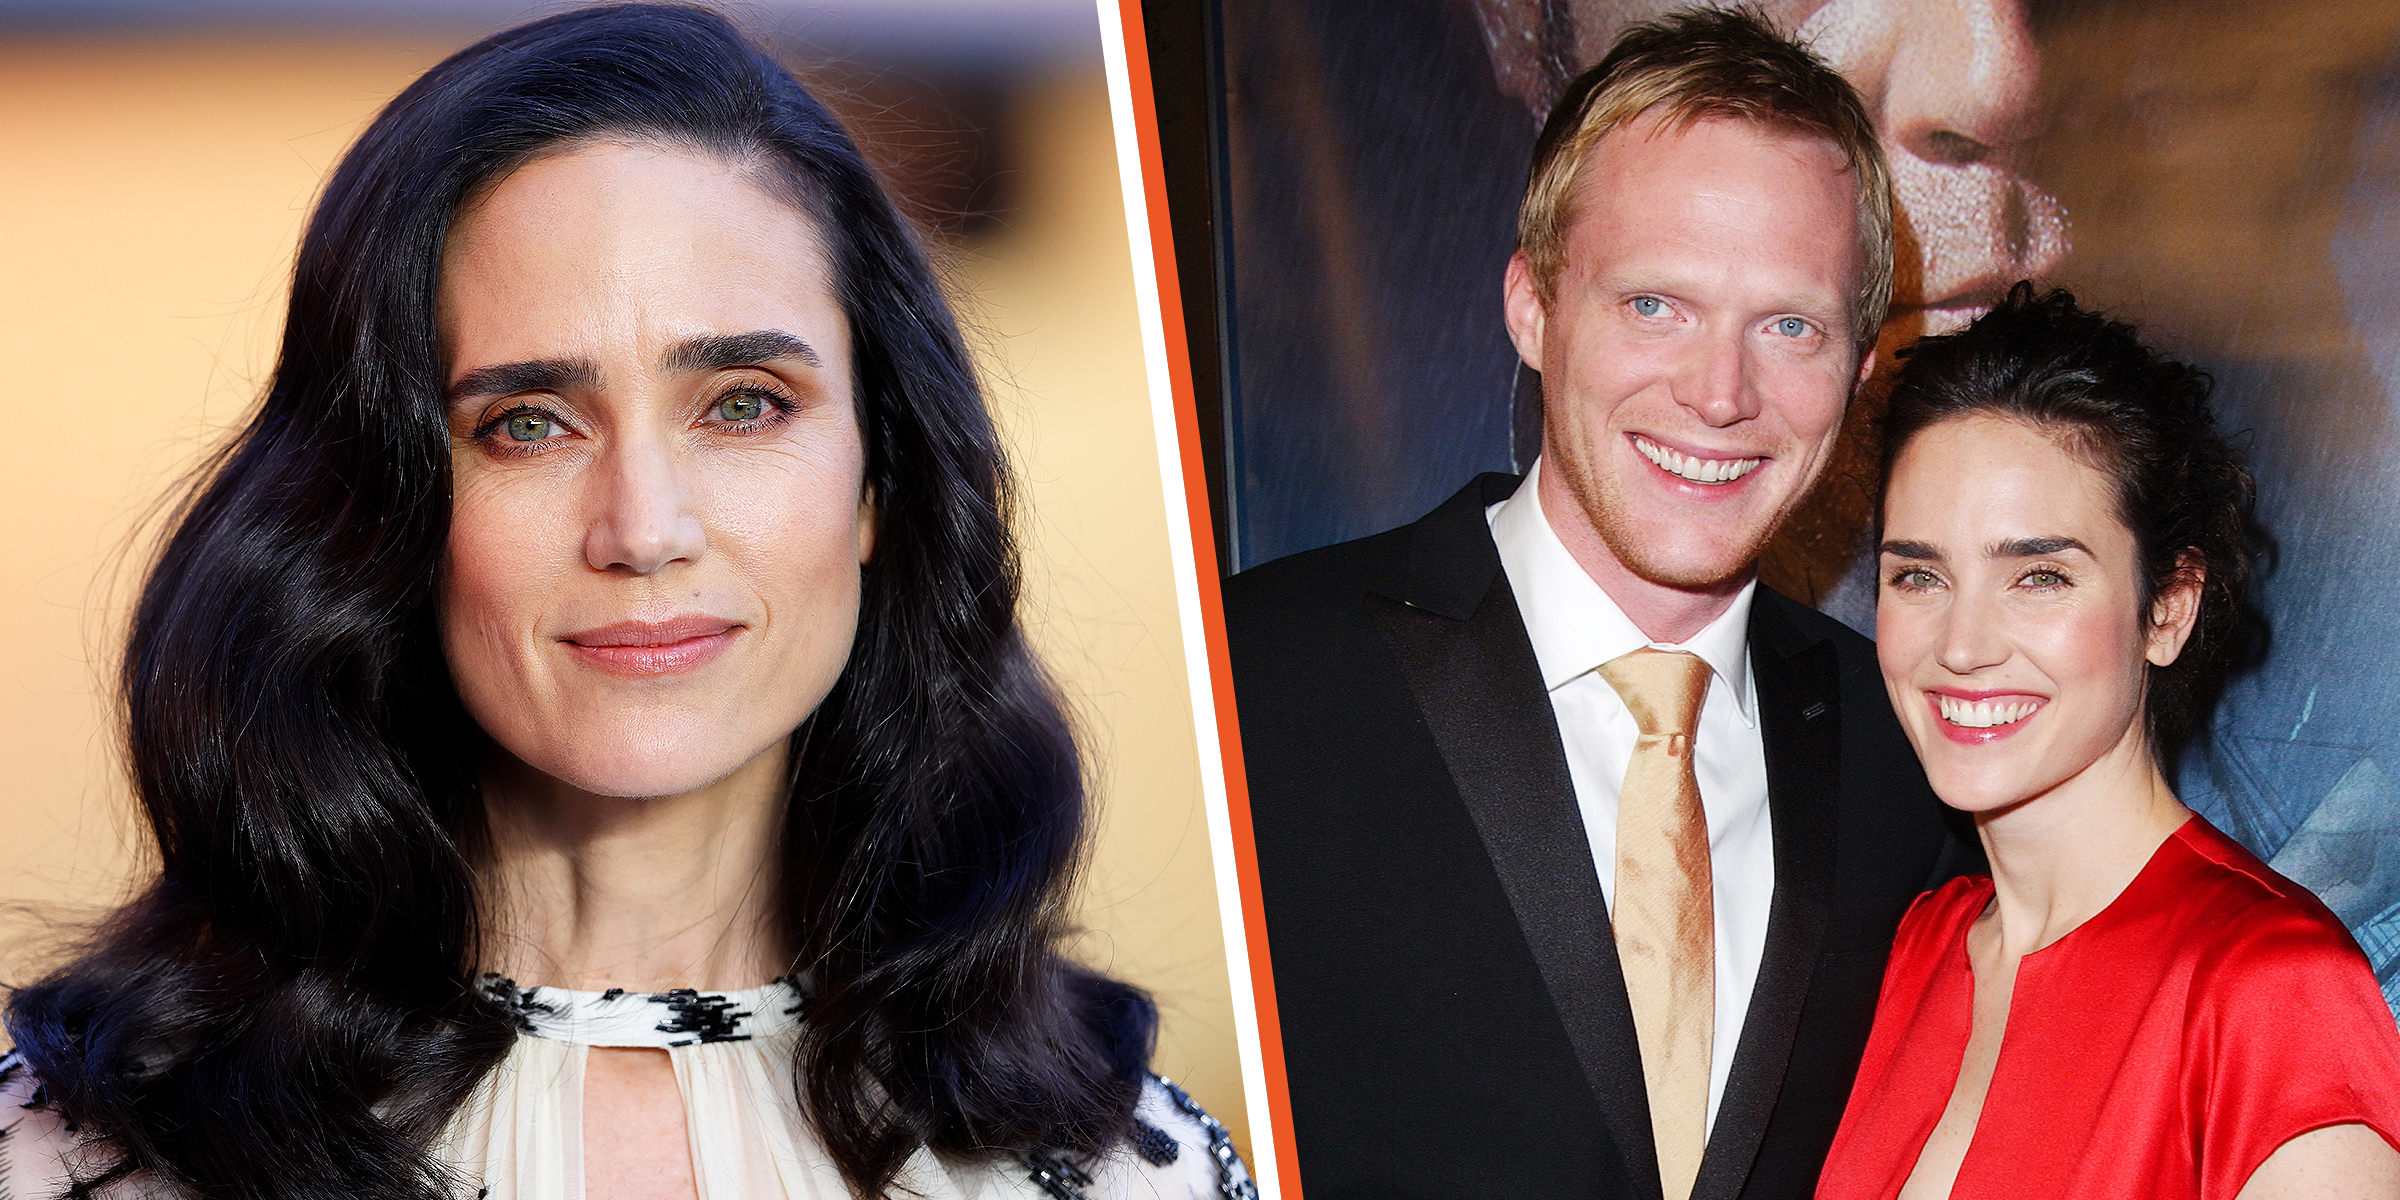 Jennifer Connelly | Paul Bettany and Jennifer Connelly | Source: Getty Images